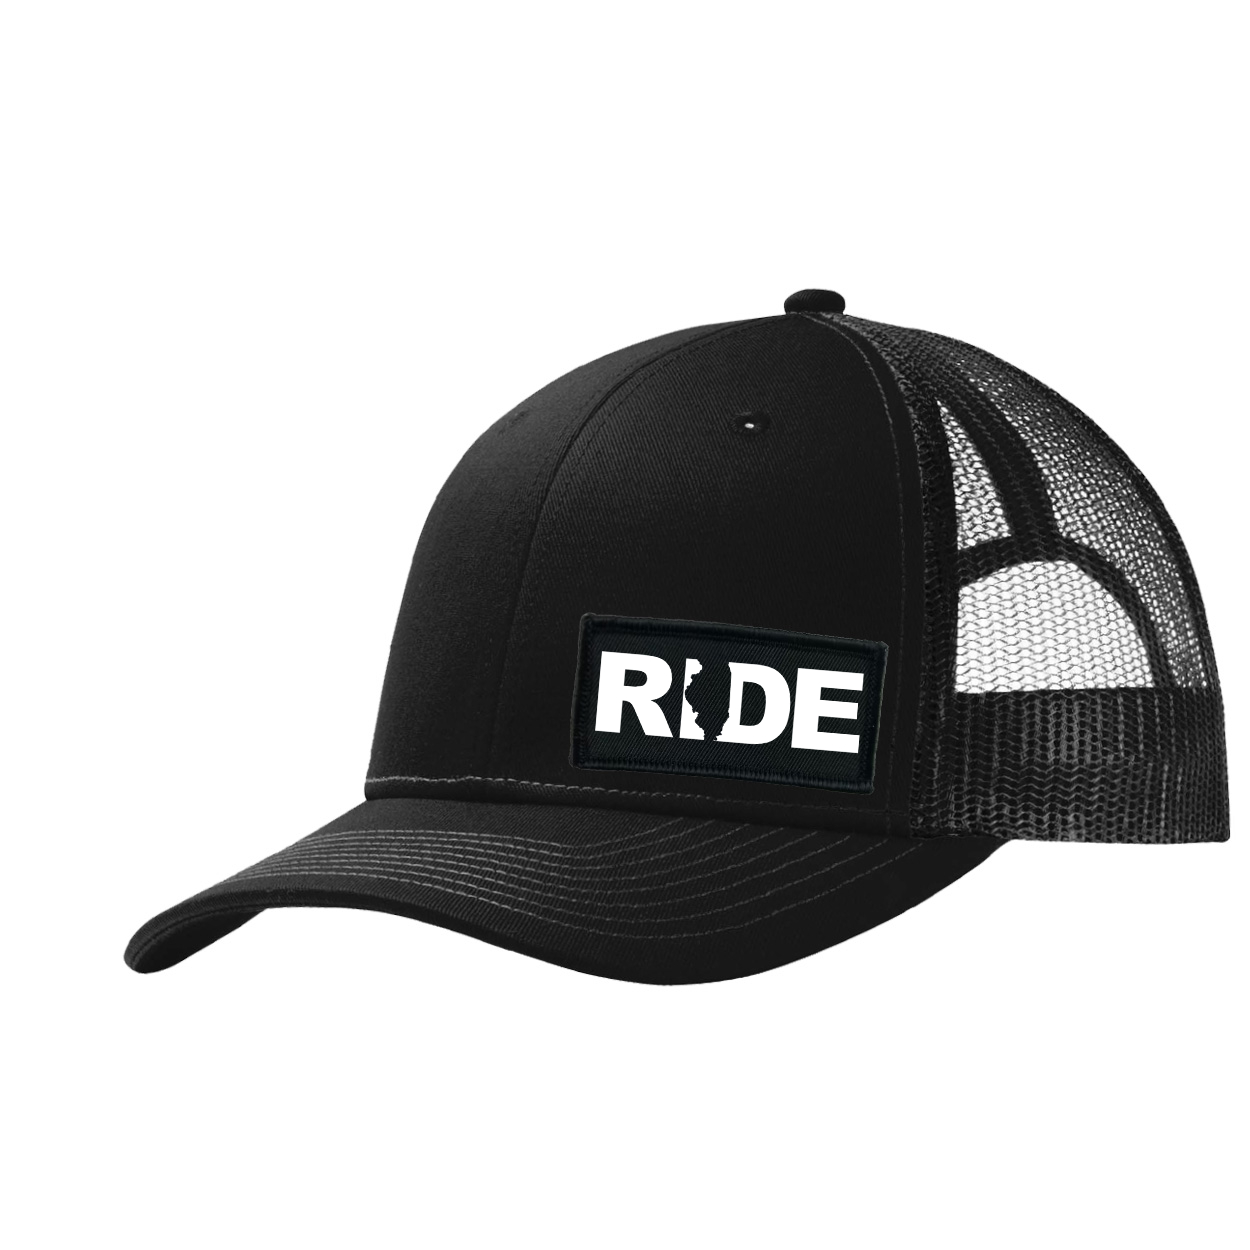 Ride Illinois Night Out Woven Patch Snapback Trucker Hat Black (White Logo)